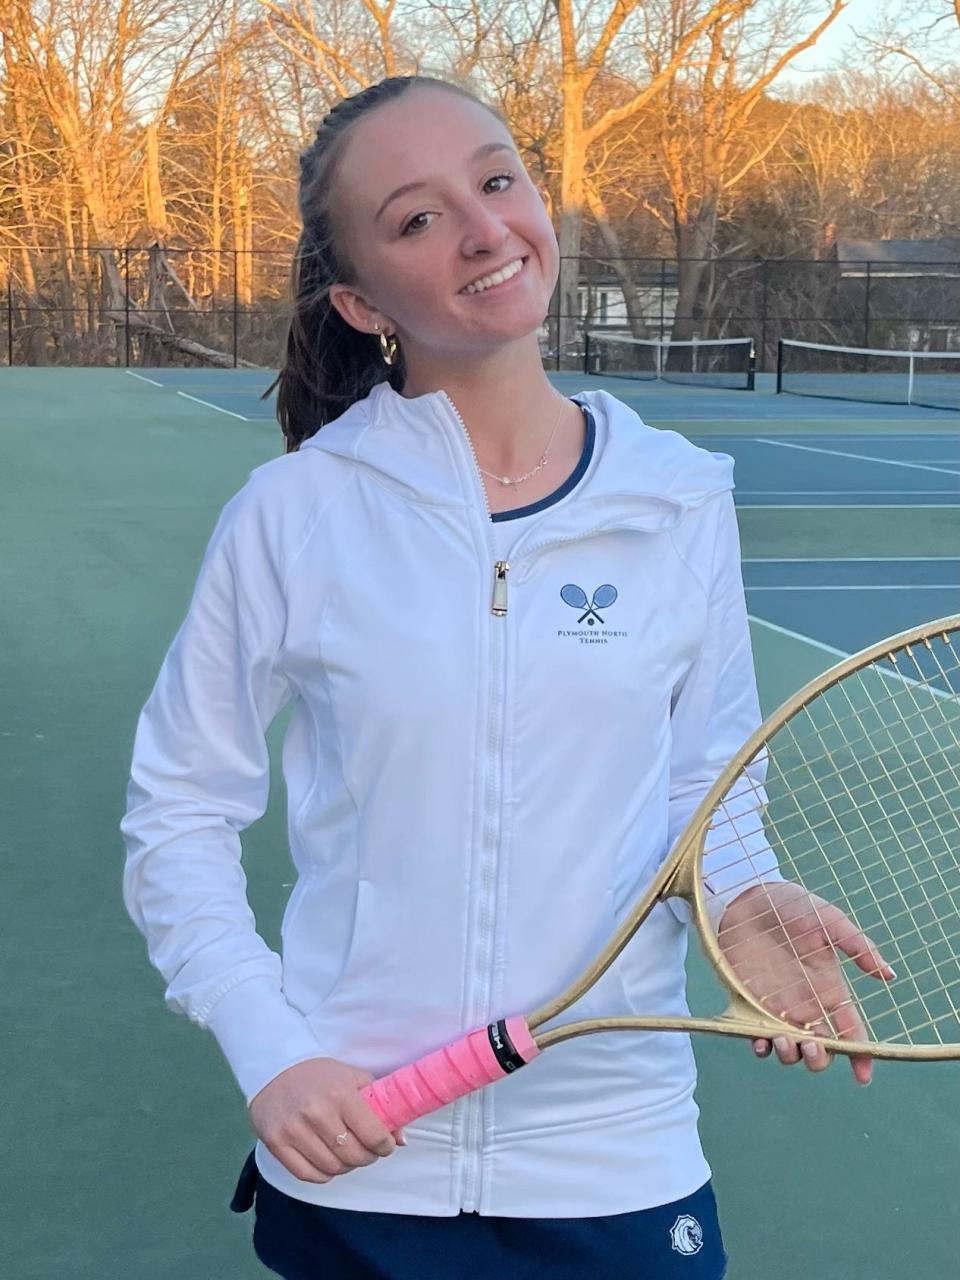 Ava Boyajian of Plymouth North High has been named to The Patriot Ledger/Enterprise Girls Tennis All-Scholastic Team.